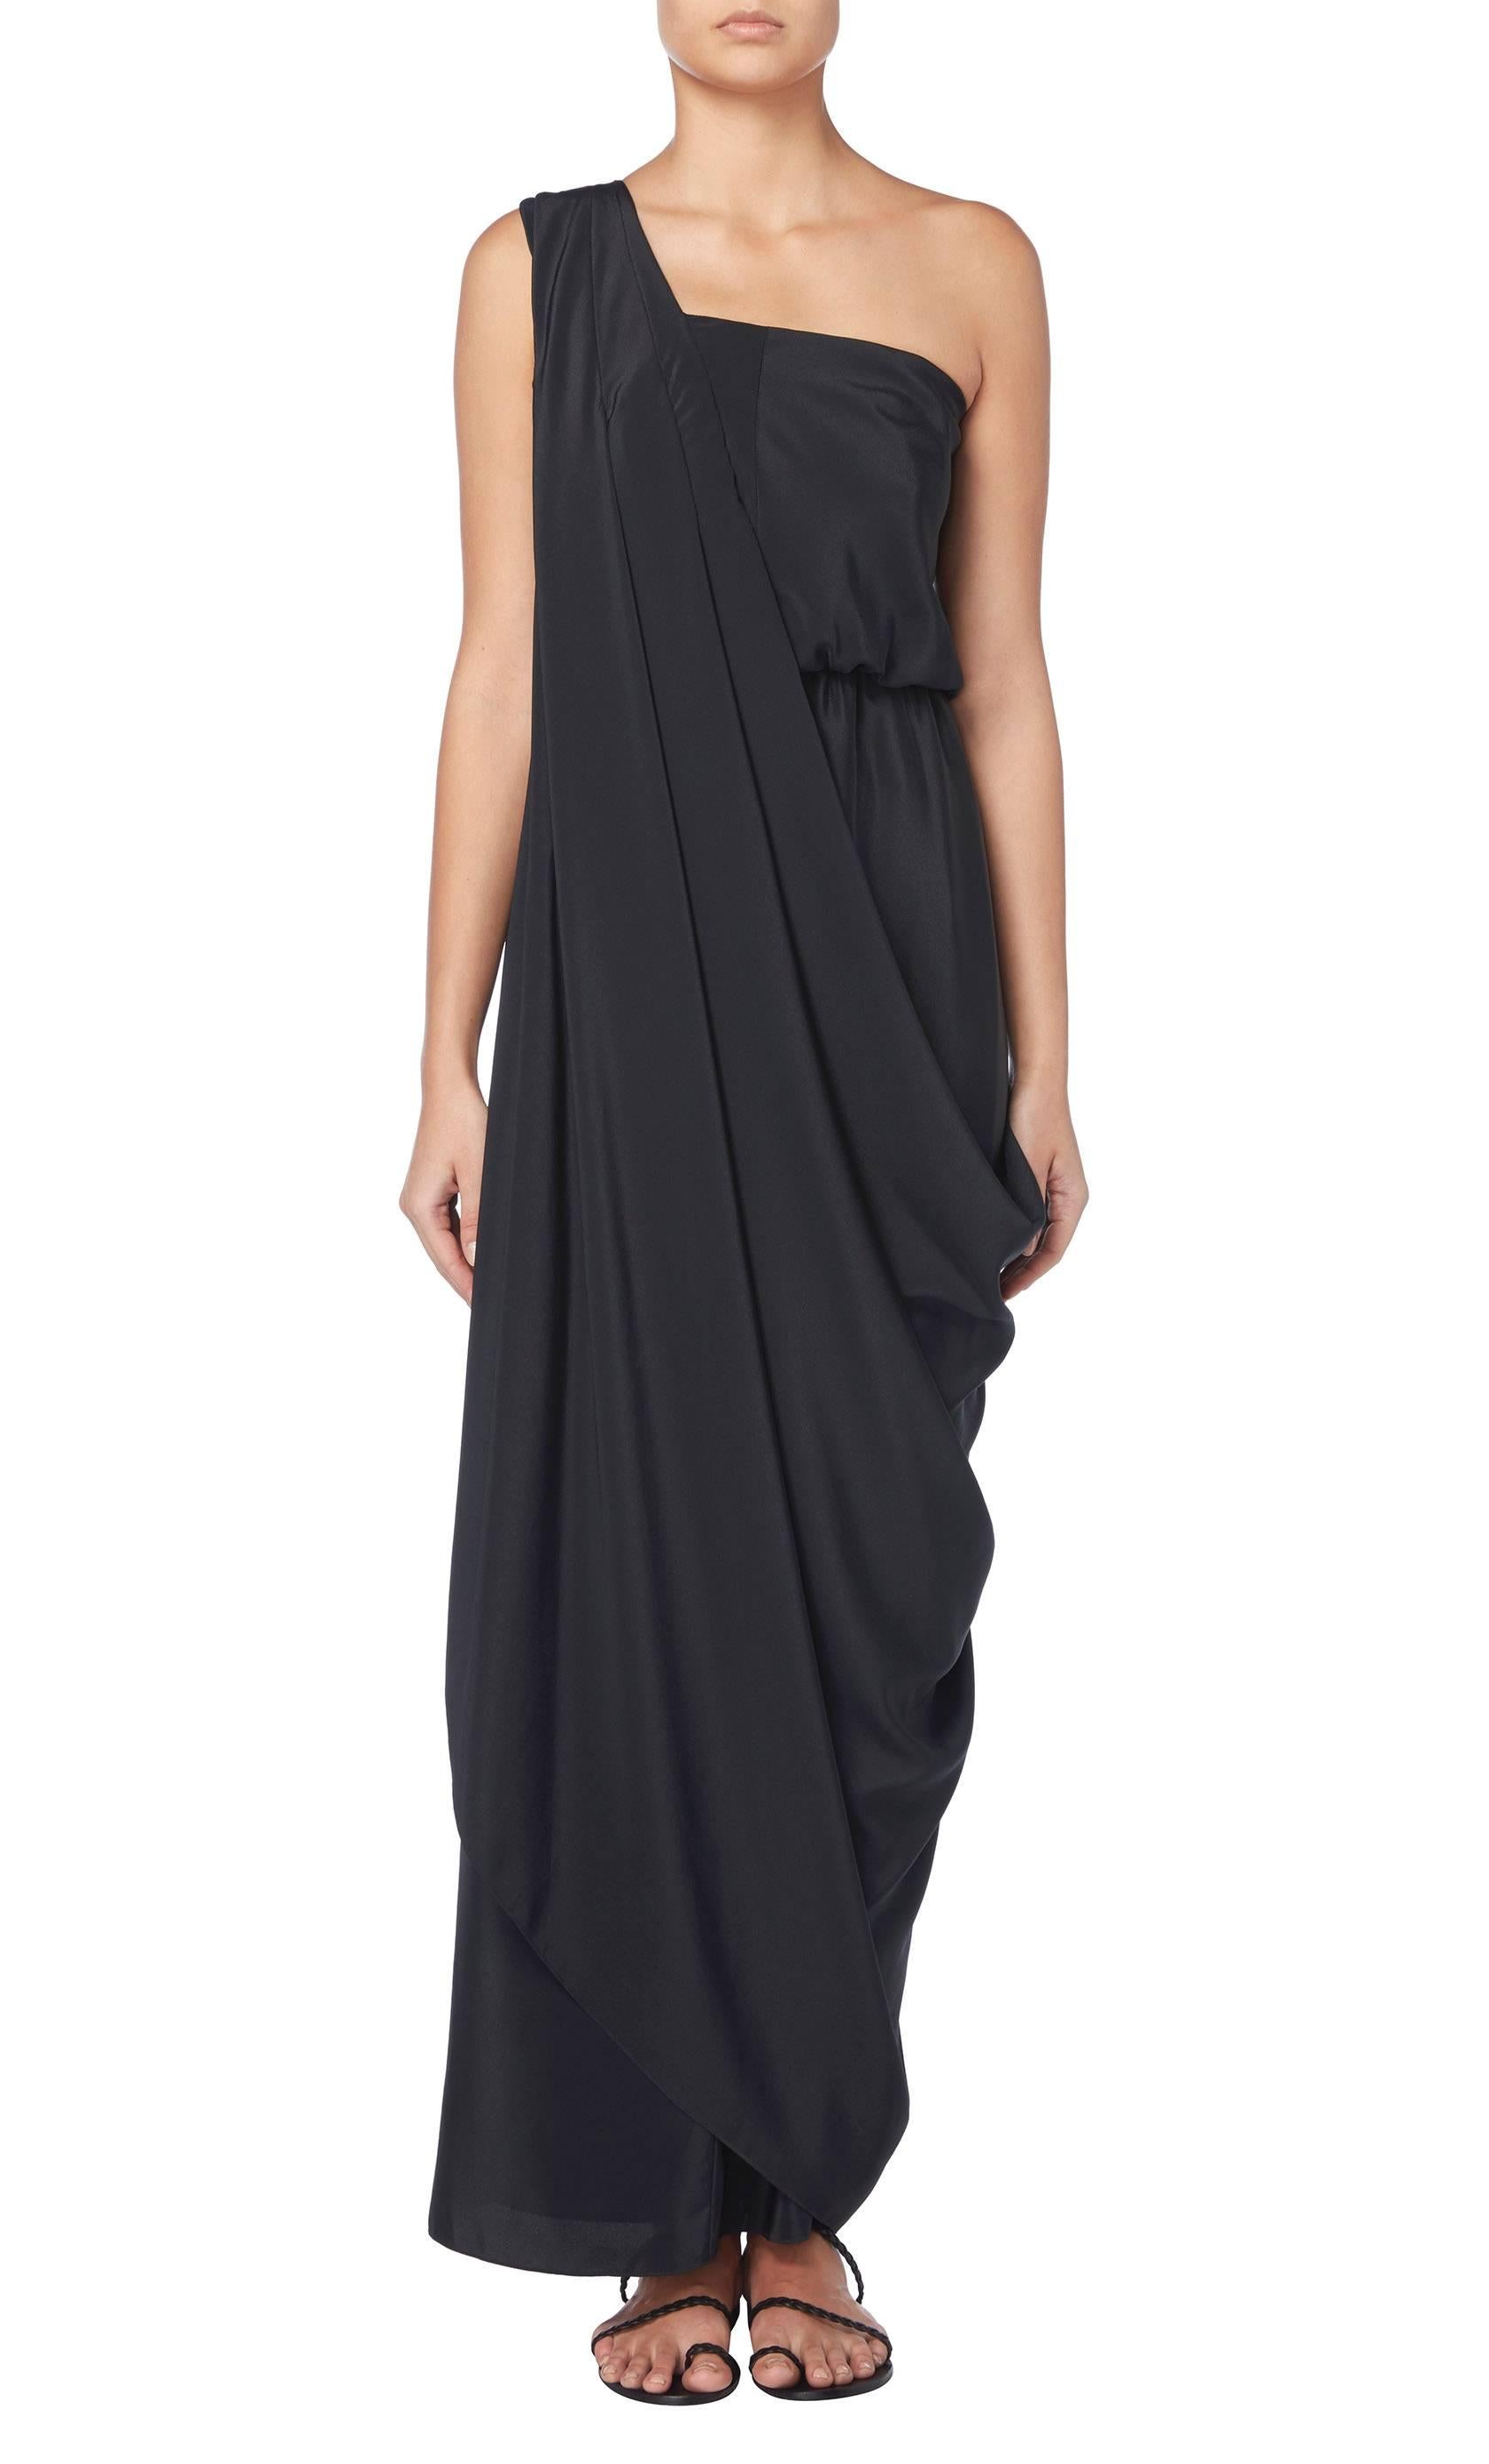 A prime example of Halston's fluid and luxurious vision, this glorious labyrinth draped dress is simultaneously chic and comfortable. Worn on one shoulder and crafted in elegant black silk crepe, the dress is extremely flattering and an ideal choice